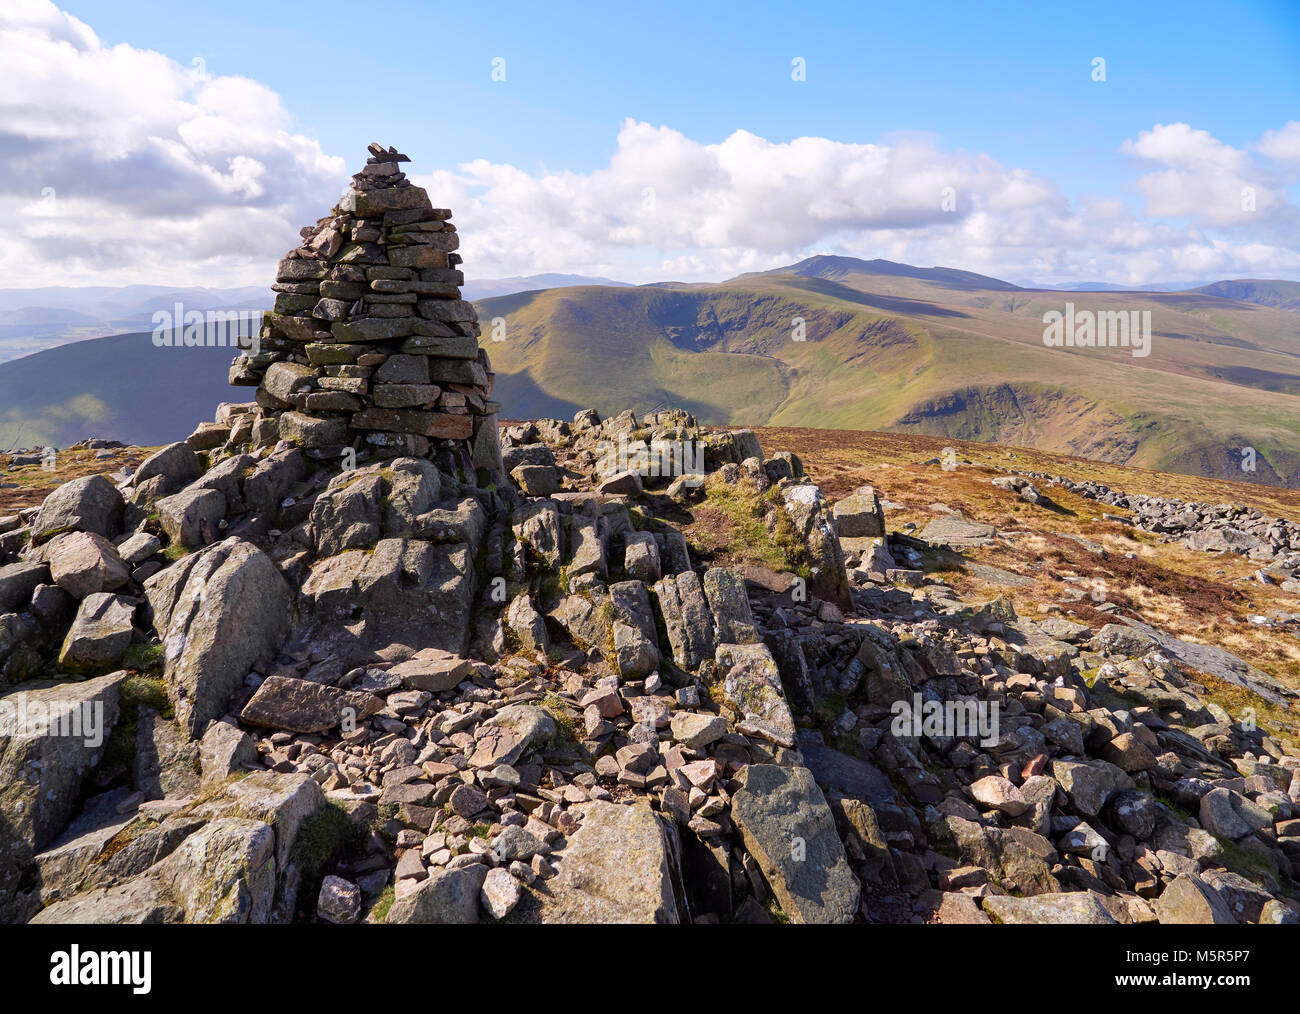 The summit cairn (pile of stones) of Carrock Fell with Bowscale Fell and Blencathra in the distance in the English Lake District, UK. Stock Photo